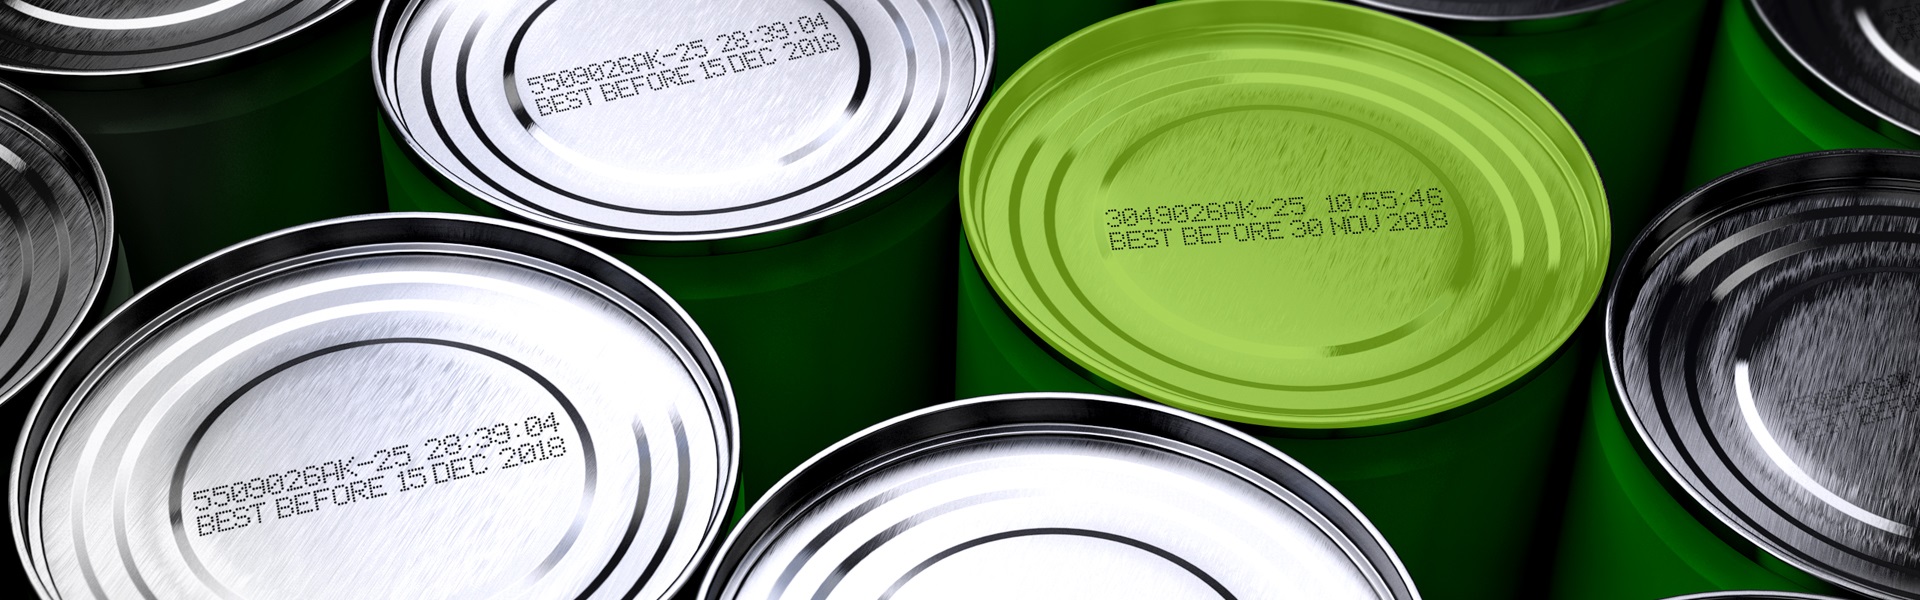 Tin cans showing expiration dates